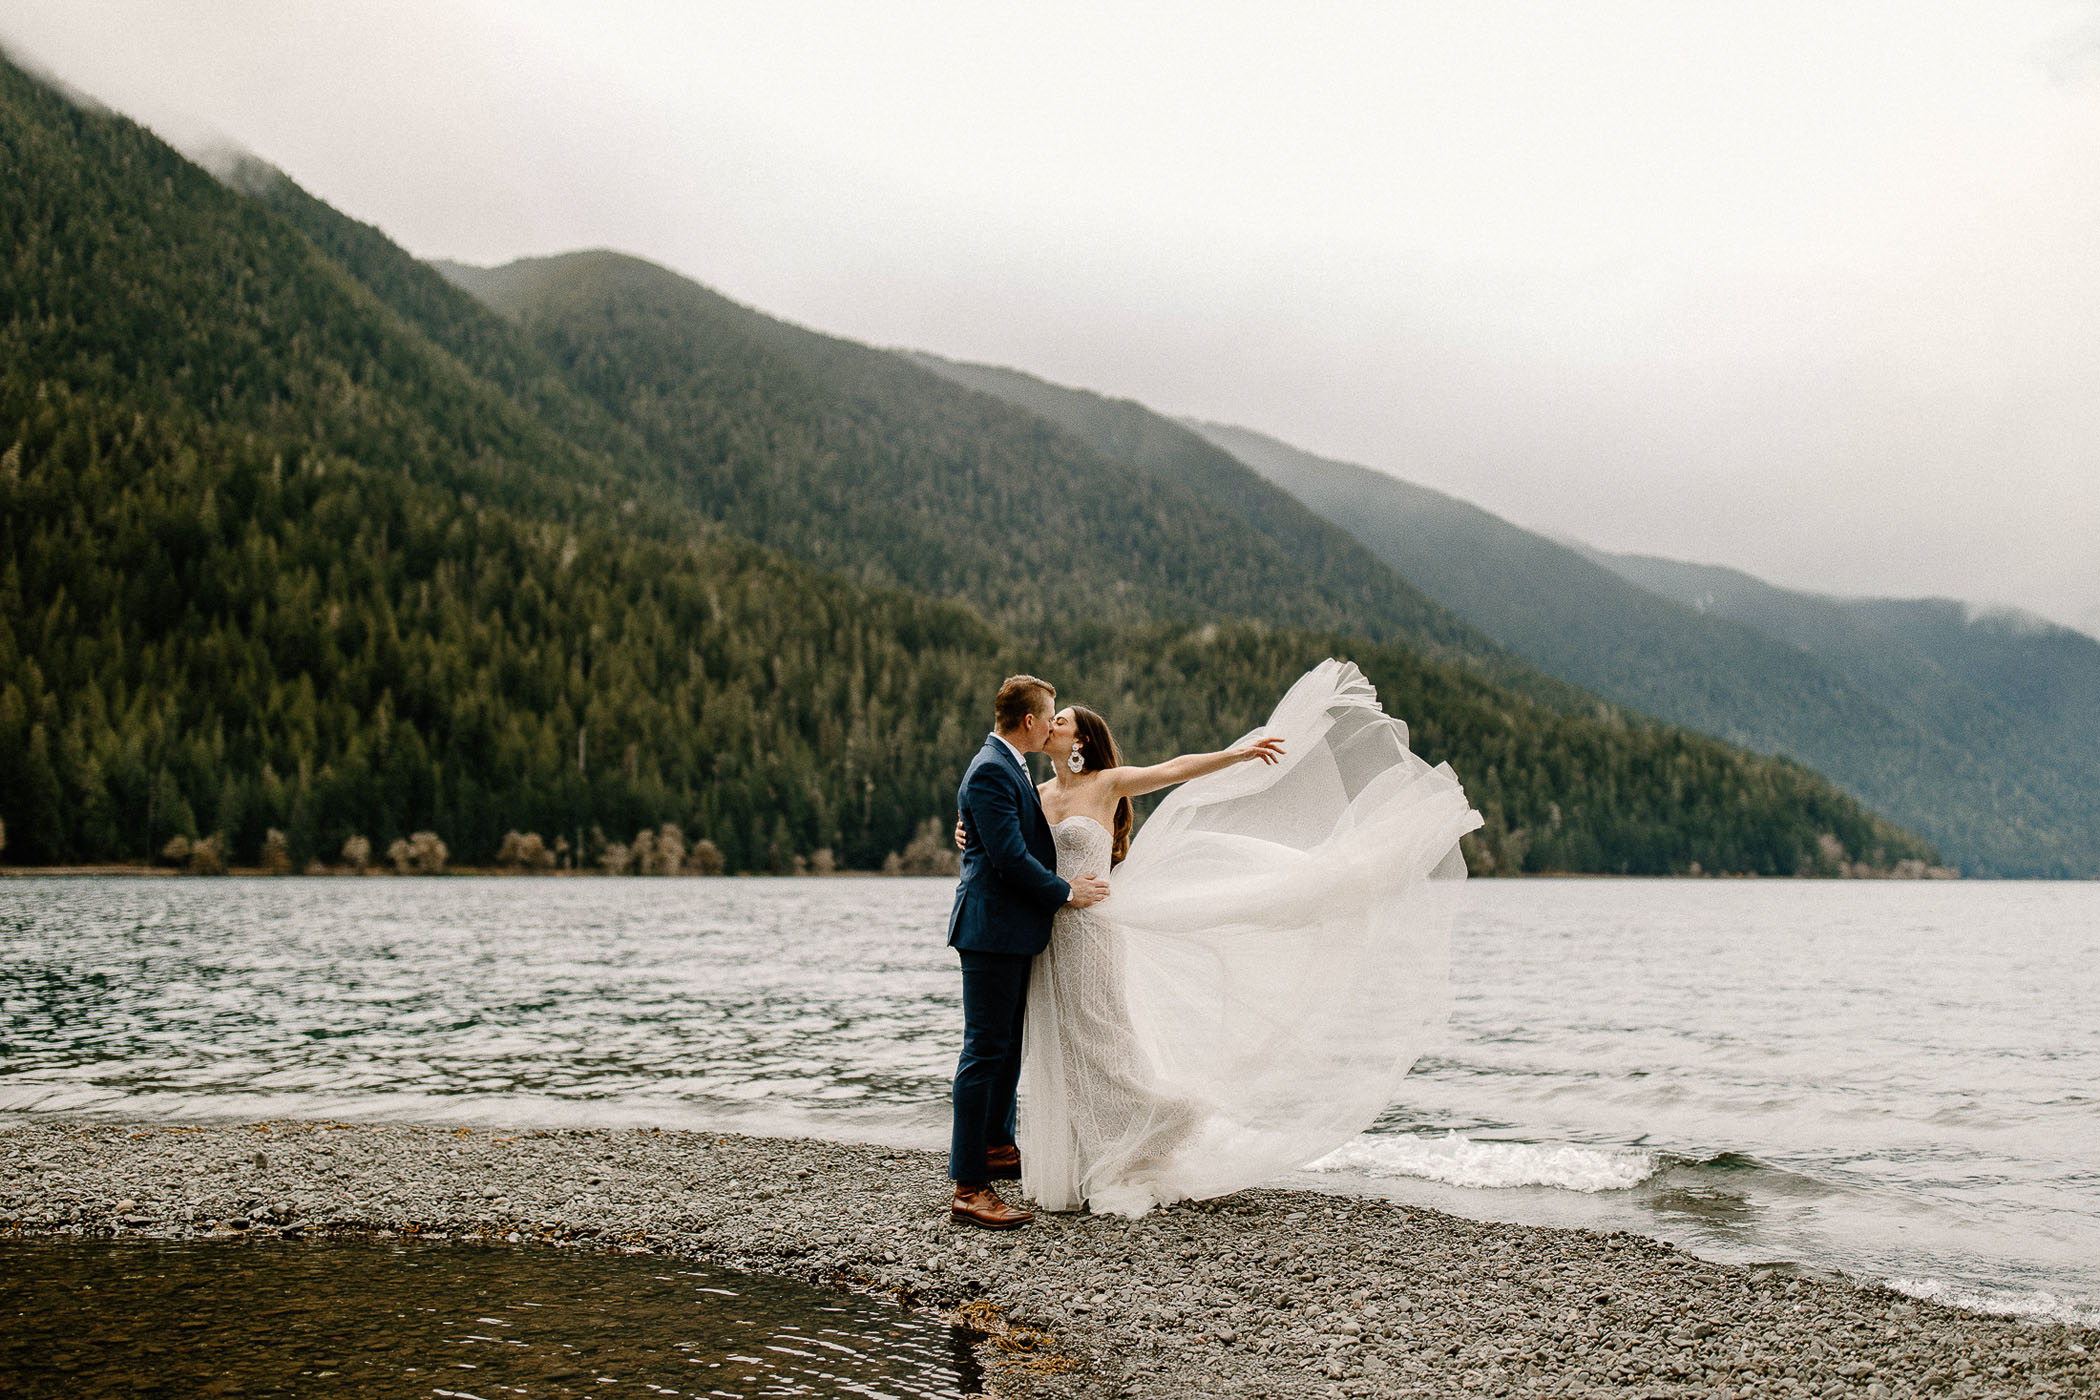 bride's dress flowing in the wind along a lake